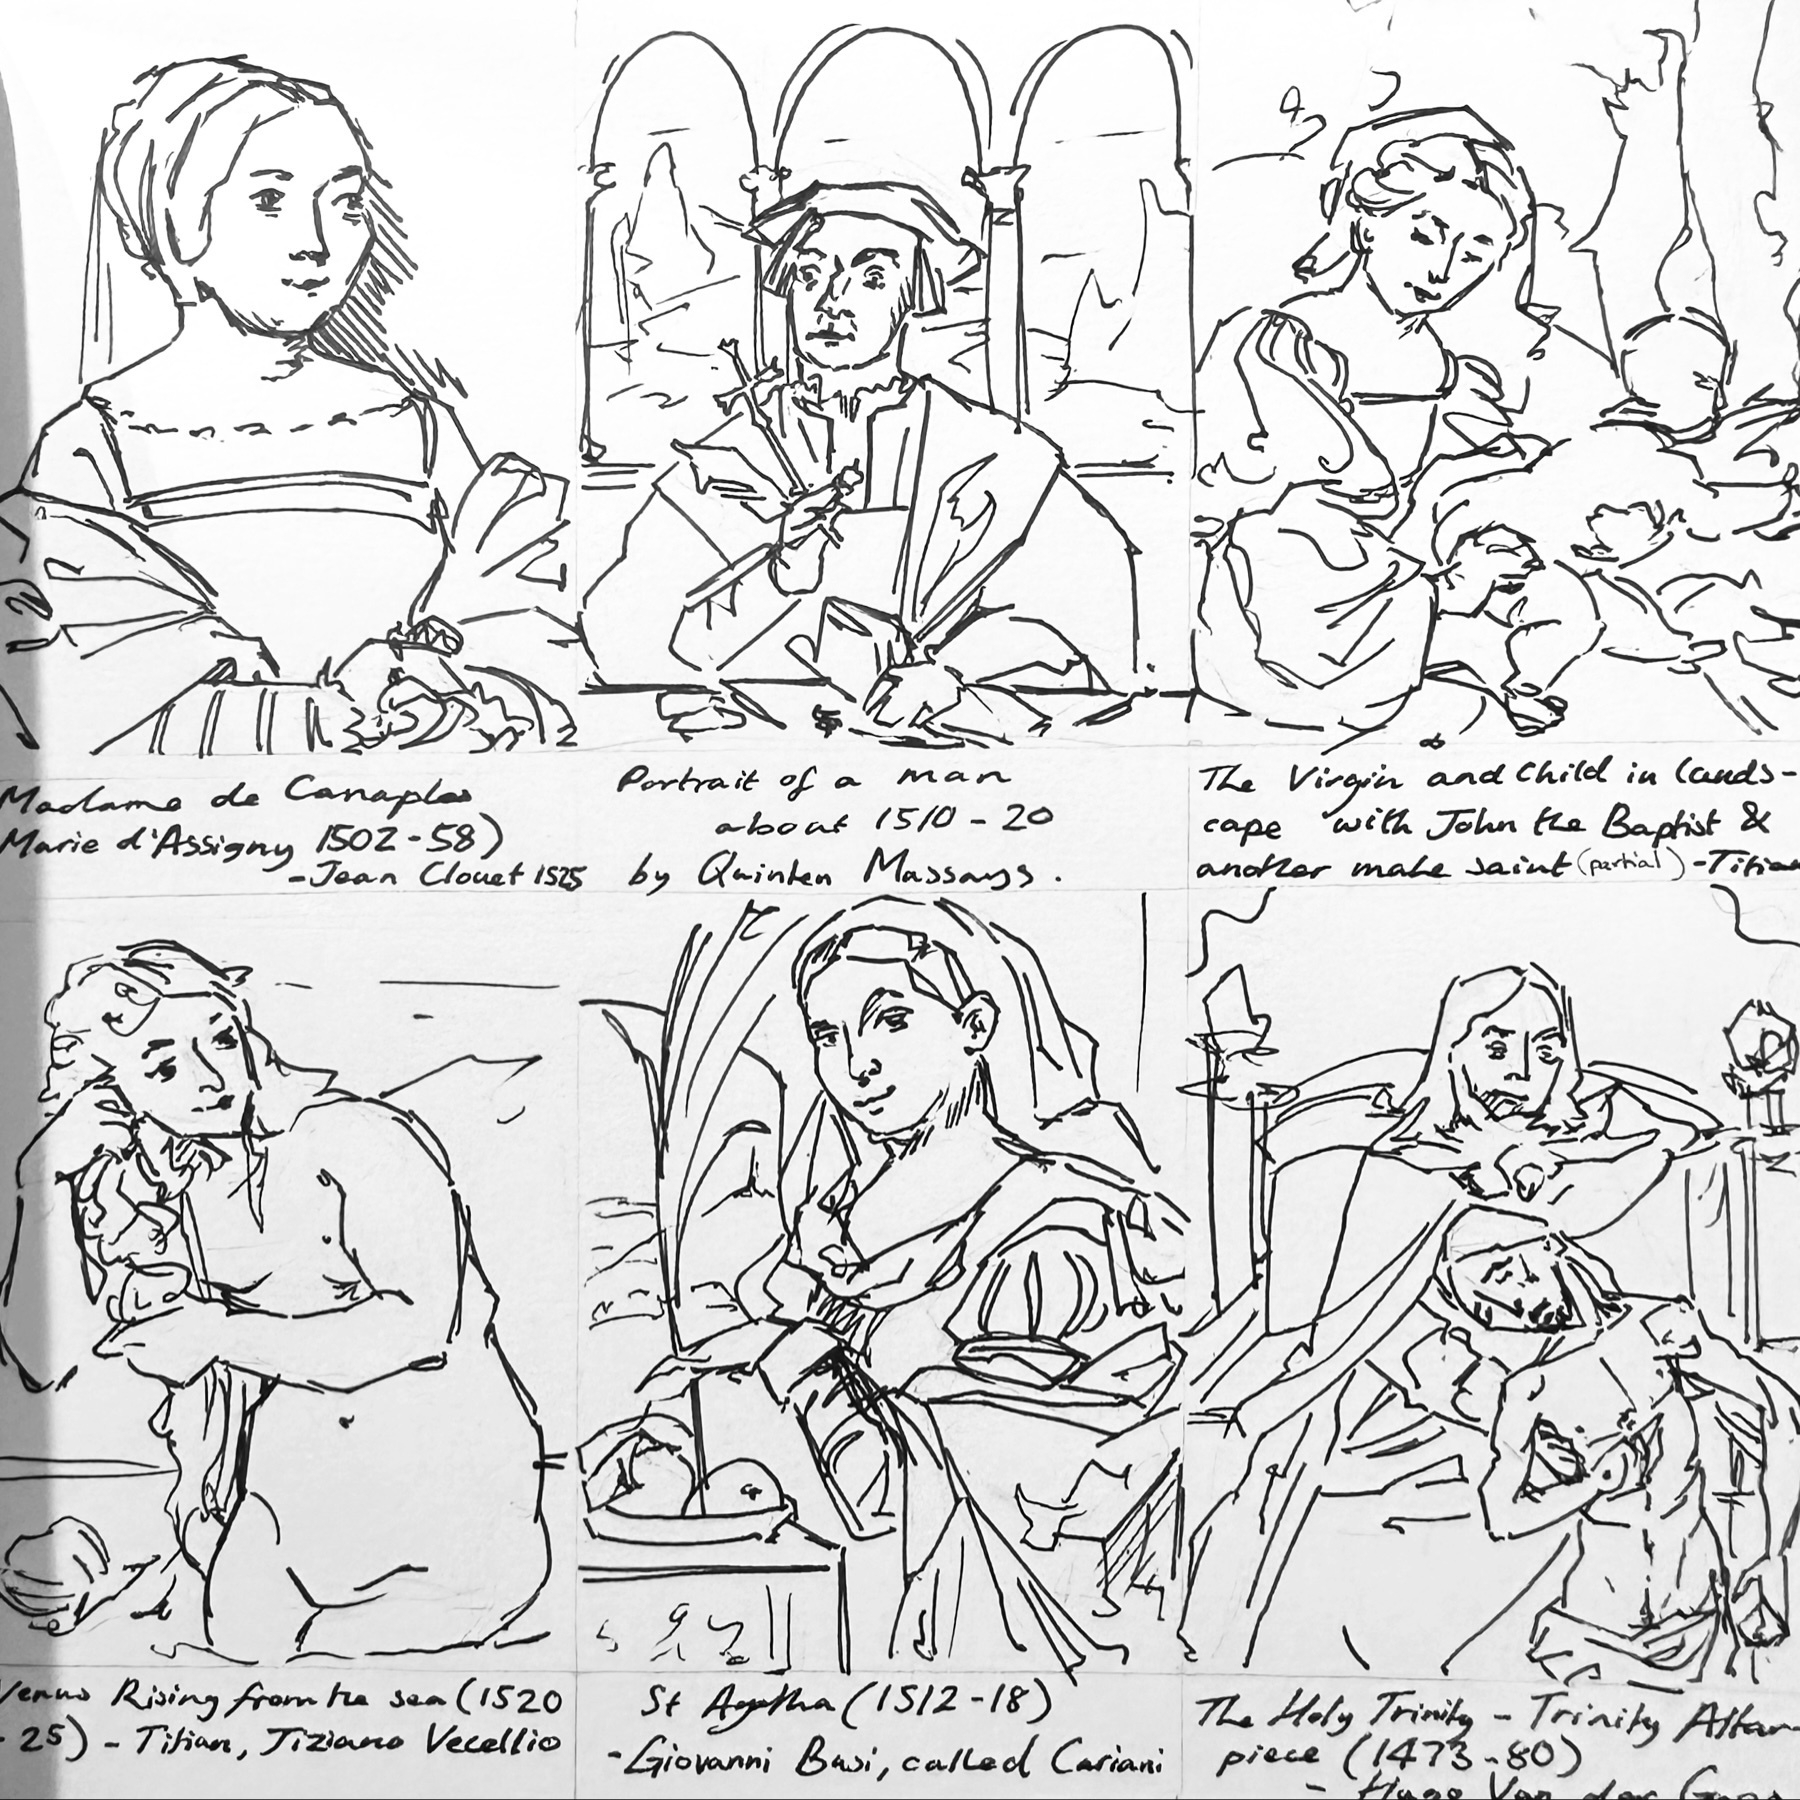 A sketch page featuring line drawings of various figures based on Renaissance paintings. The drawings, accompanied by annotations, include depictions of "Madonna de Campagna" by Jean Clouet, "Portrait of a Man" by Quinten Massys,